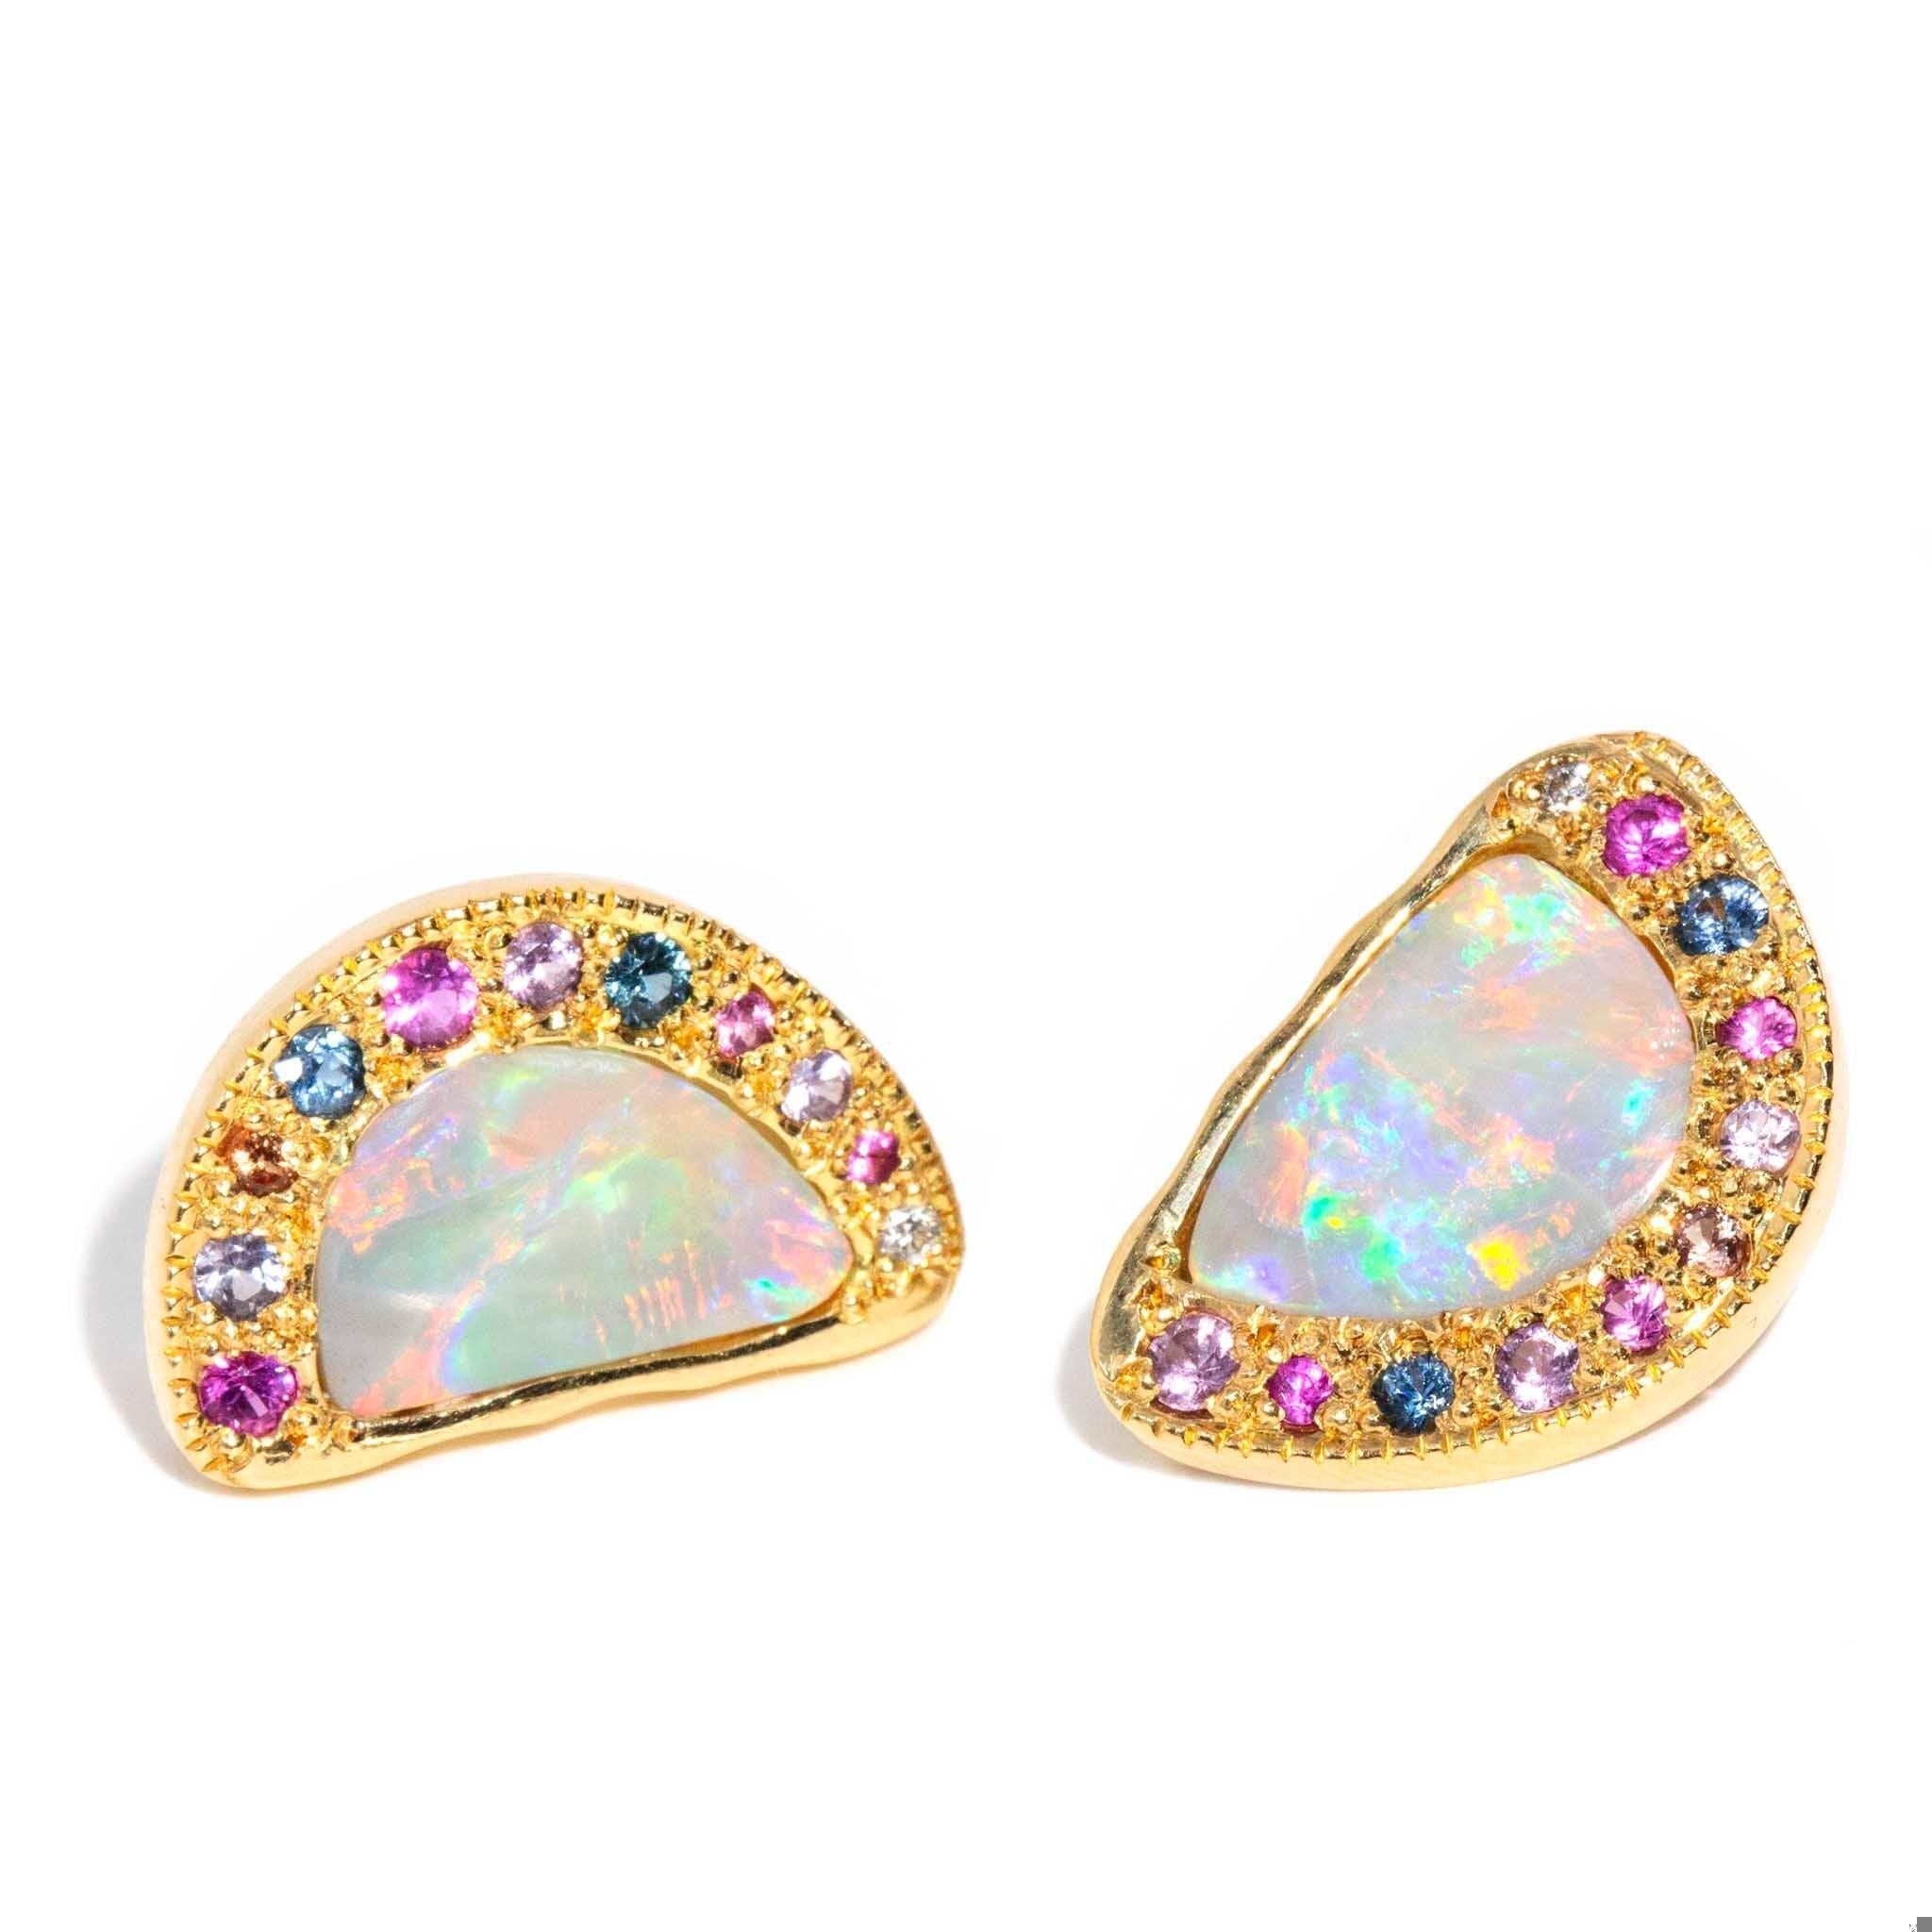 Reinvented Vintage Opal Pearl Diamond & Sapphire Earrings 18 Carat Gold For Sale 8